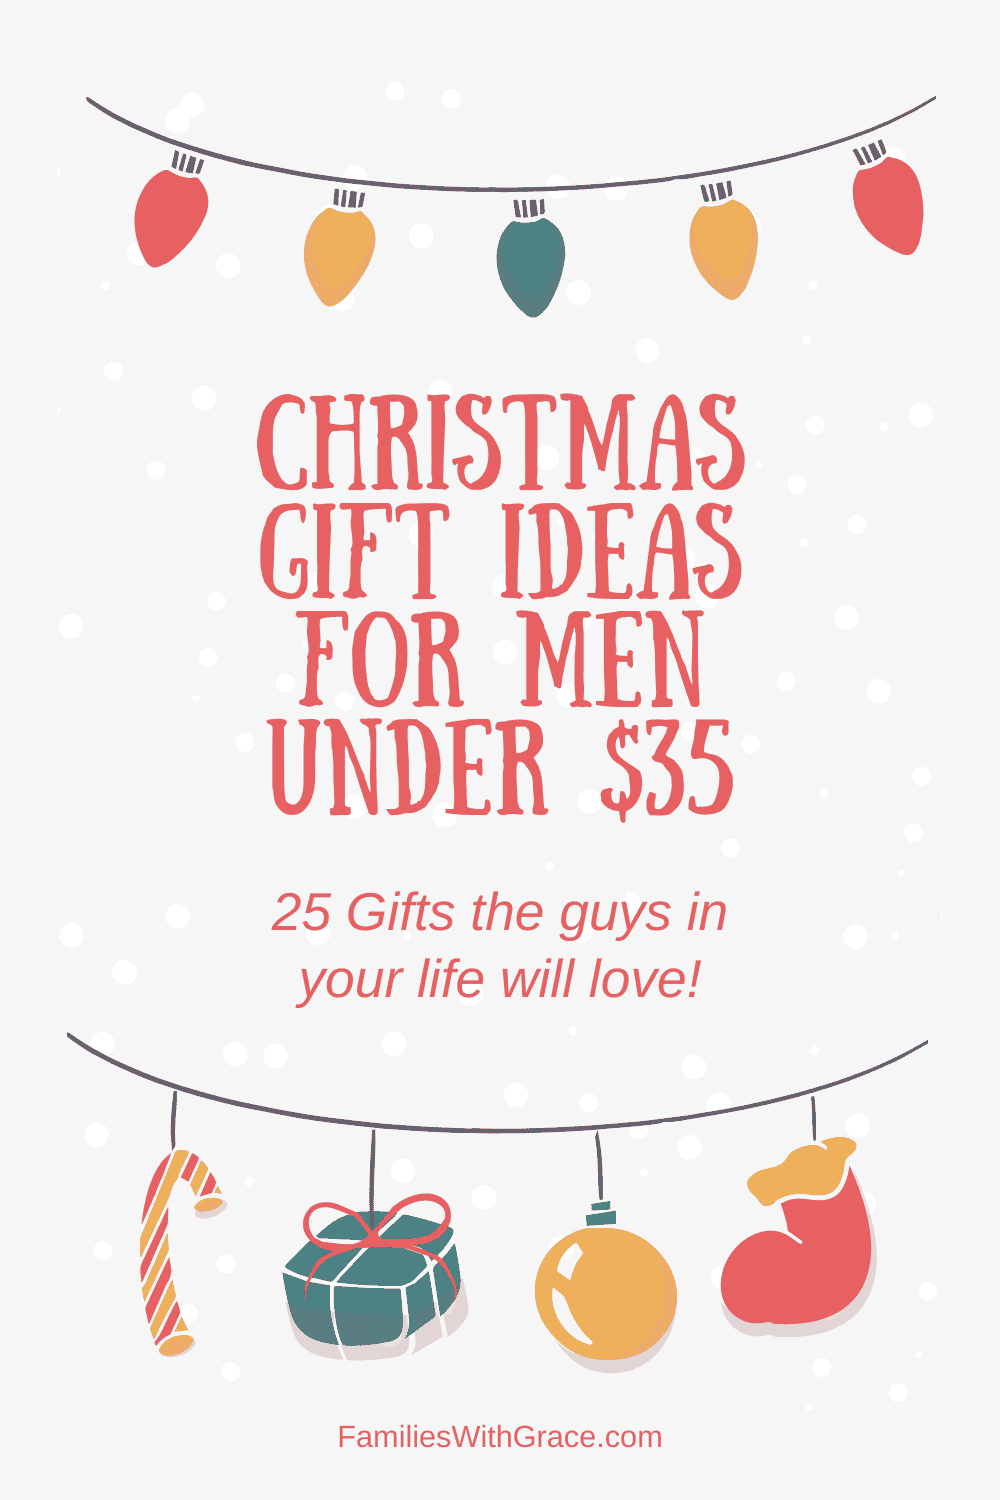 Christmas gifts for men under $35